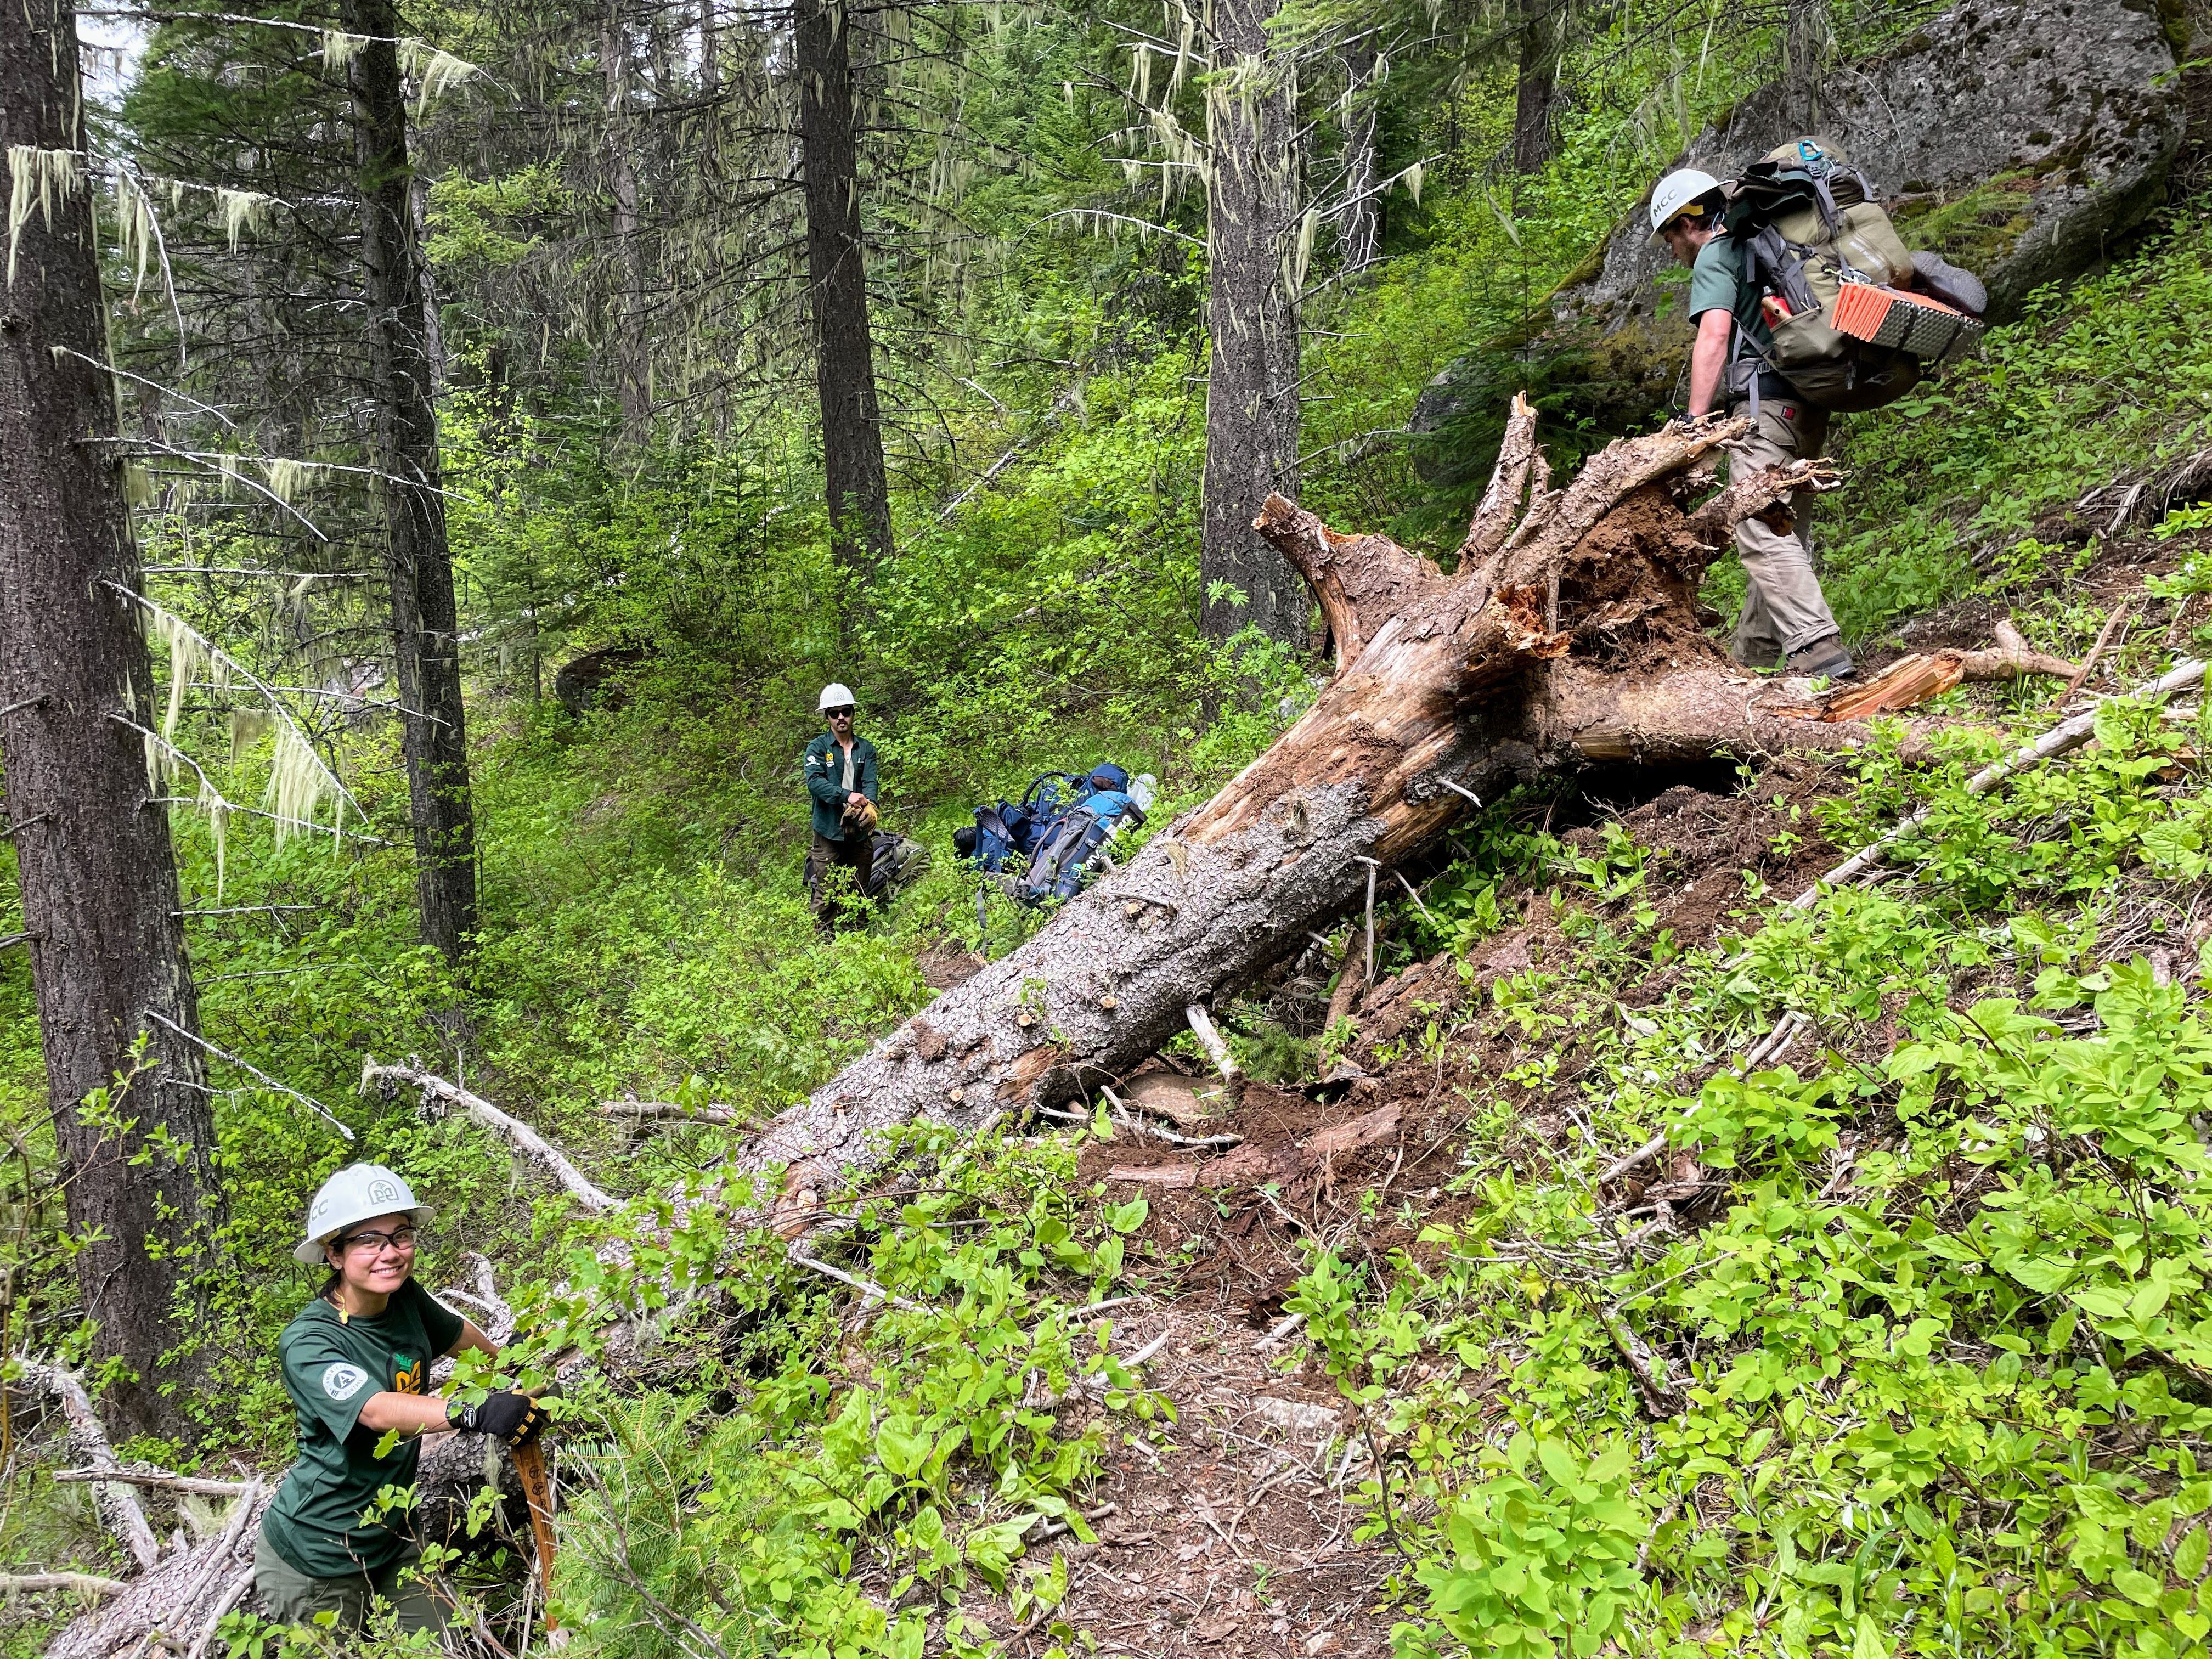 There is a tree laying horizontally across the trail. Two leaders are at the top and bottom of the tree, while an MCC staff member stands on the trail in the background behind the tree. They are preparing to cut it off the trail.